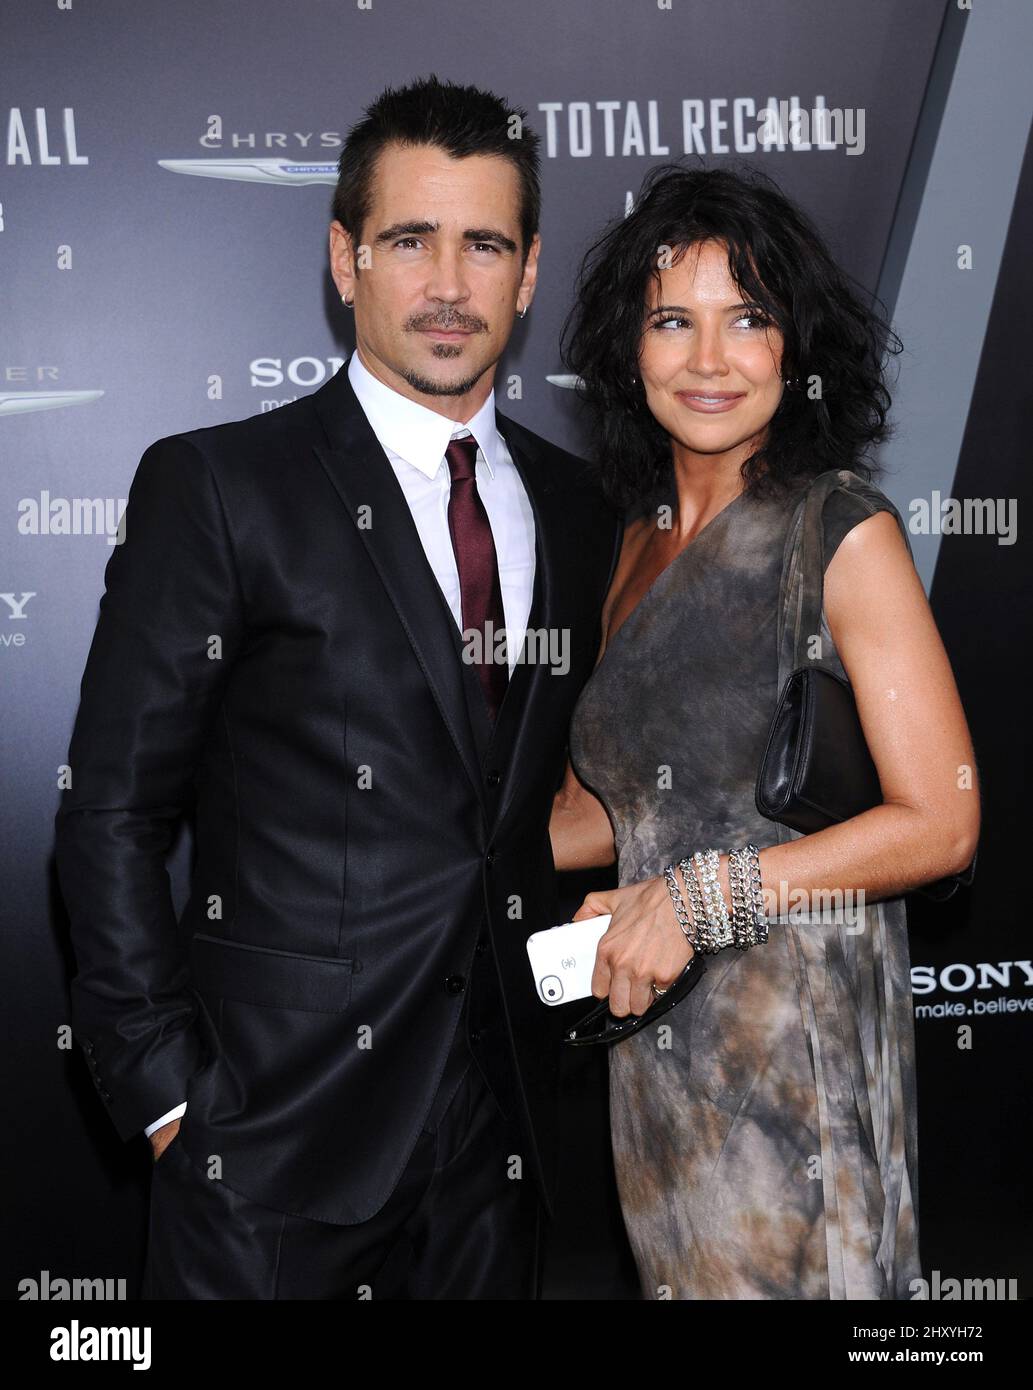 Colin Farrell and sister Claudine attends the 'Total Recall' Los Angeles premiere held at Grauman's Chinese Theatre. Stock Photo